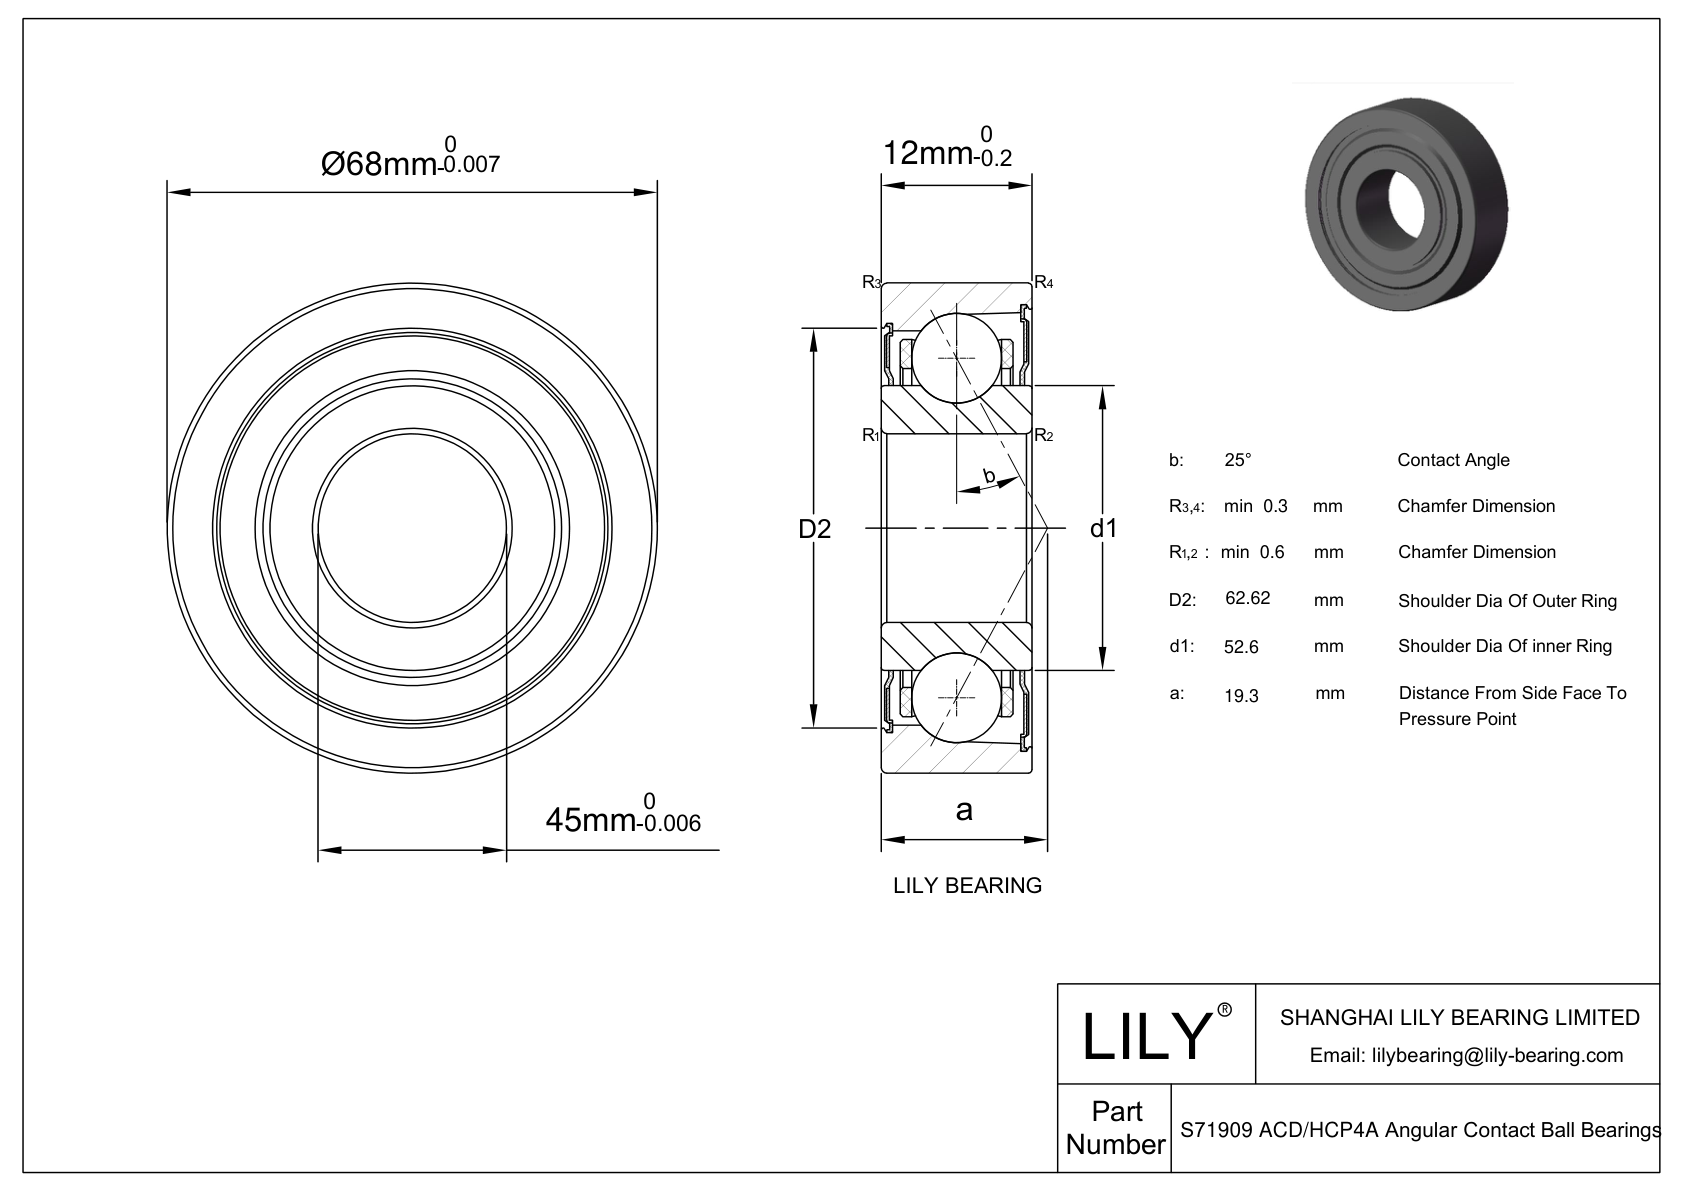 S71909 ACD/HCP4A Super Precision Angular Contact Ball Bearings cad drawing